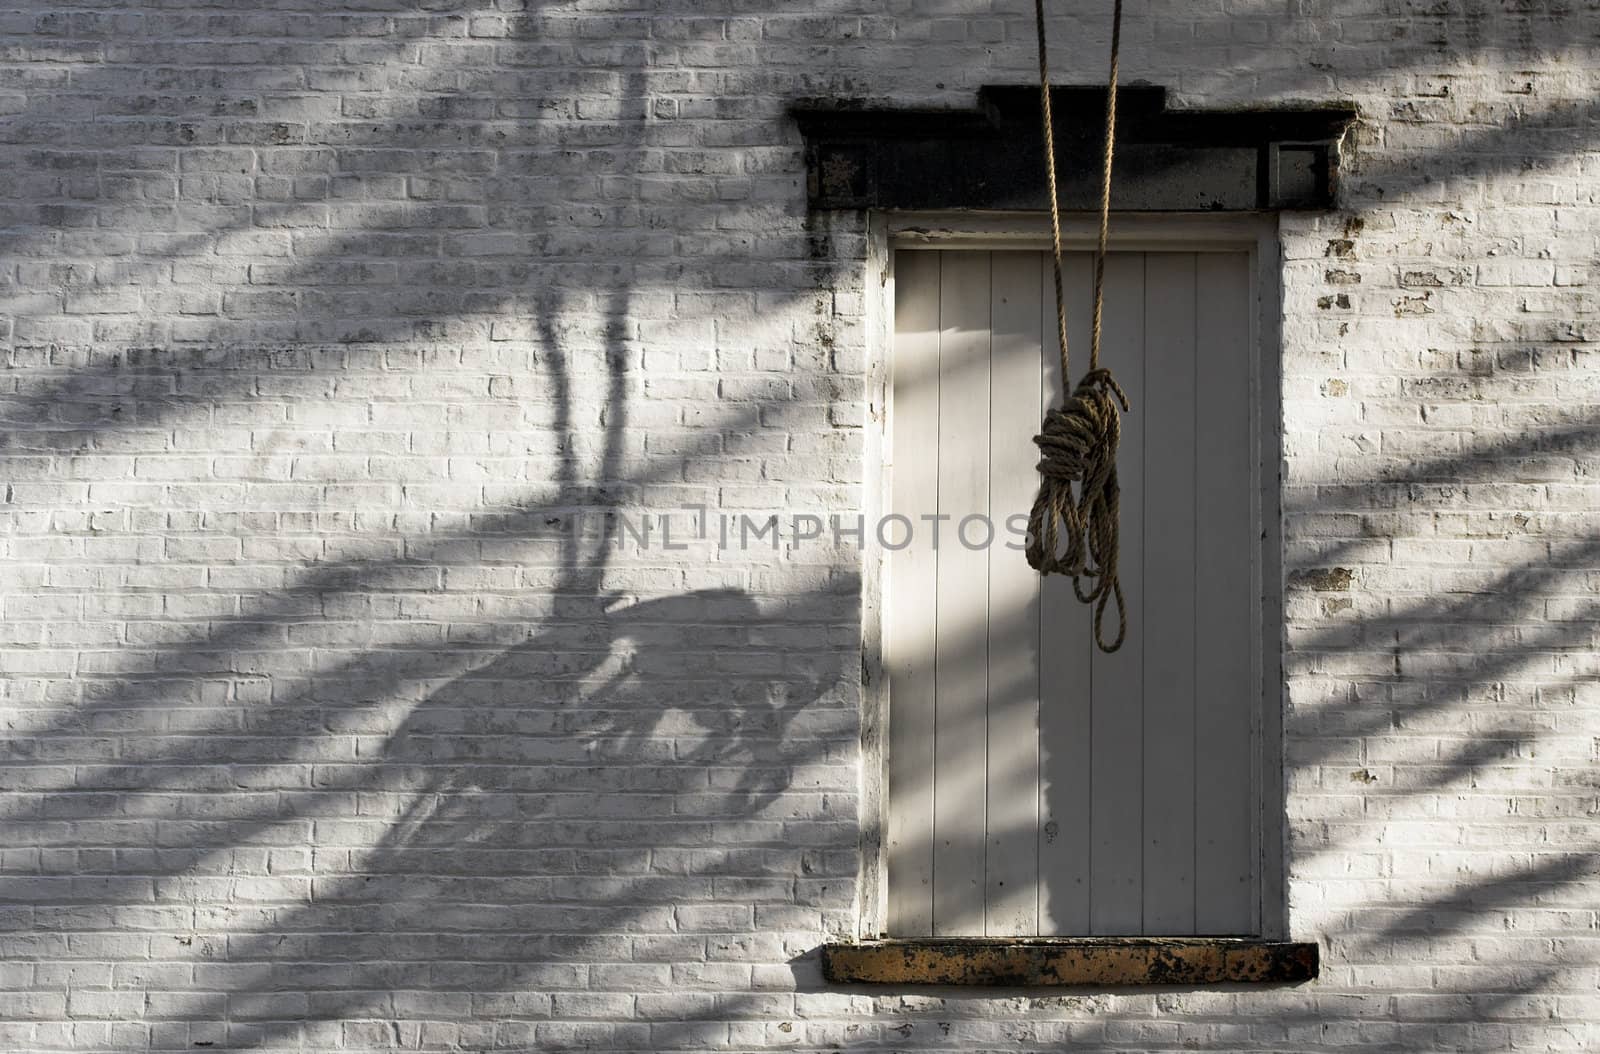 Rope and Shadows by sbonk